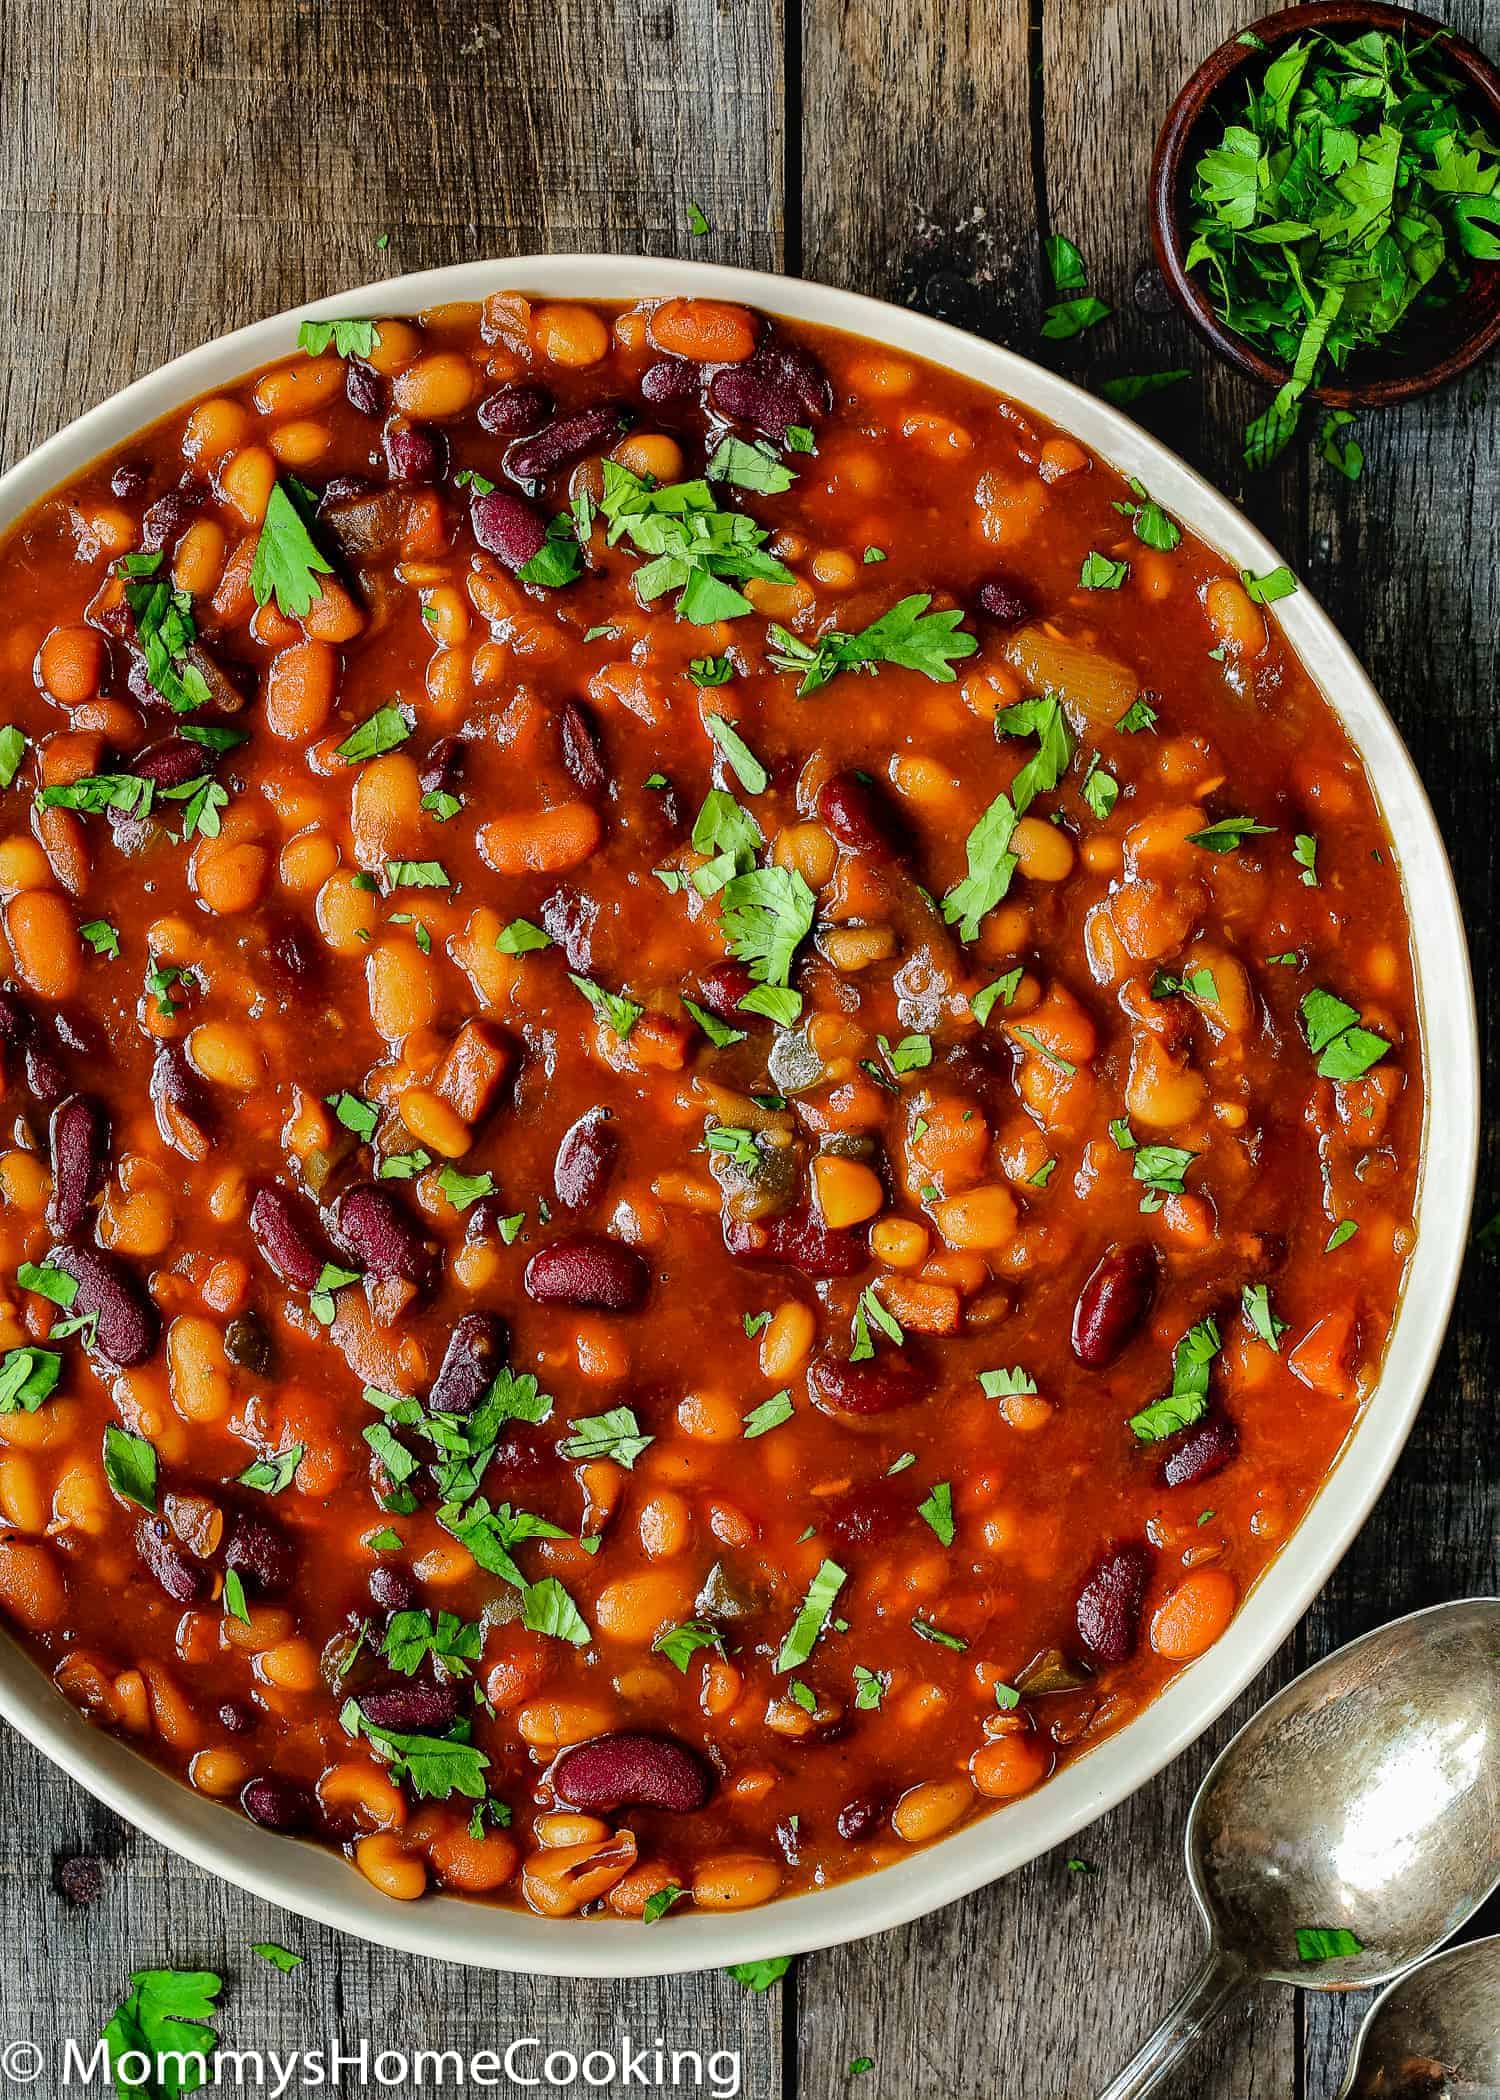 Easy Instant Pot Baked Beans - Mommy's Home Cooking